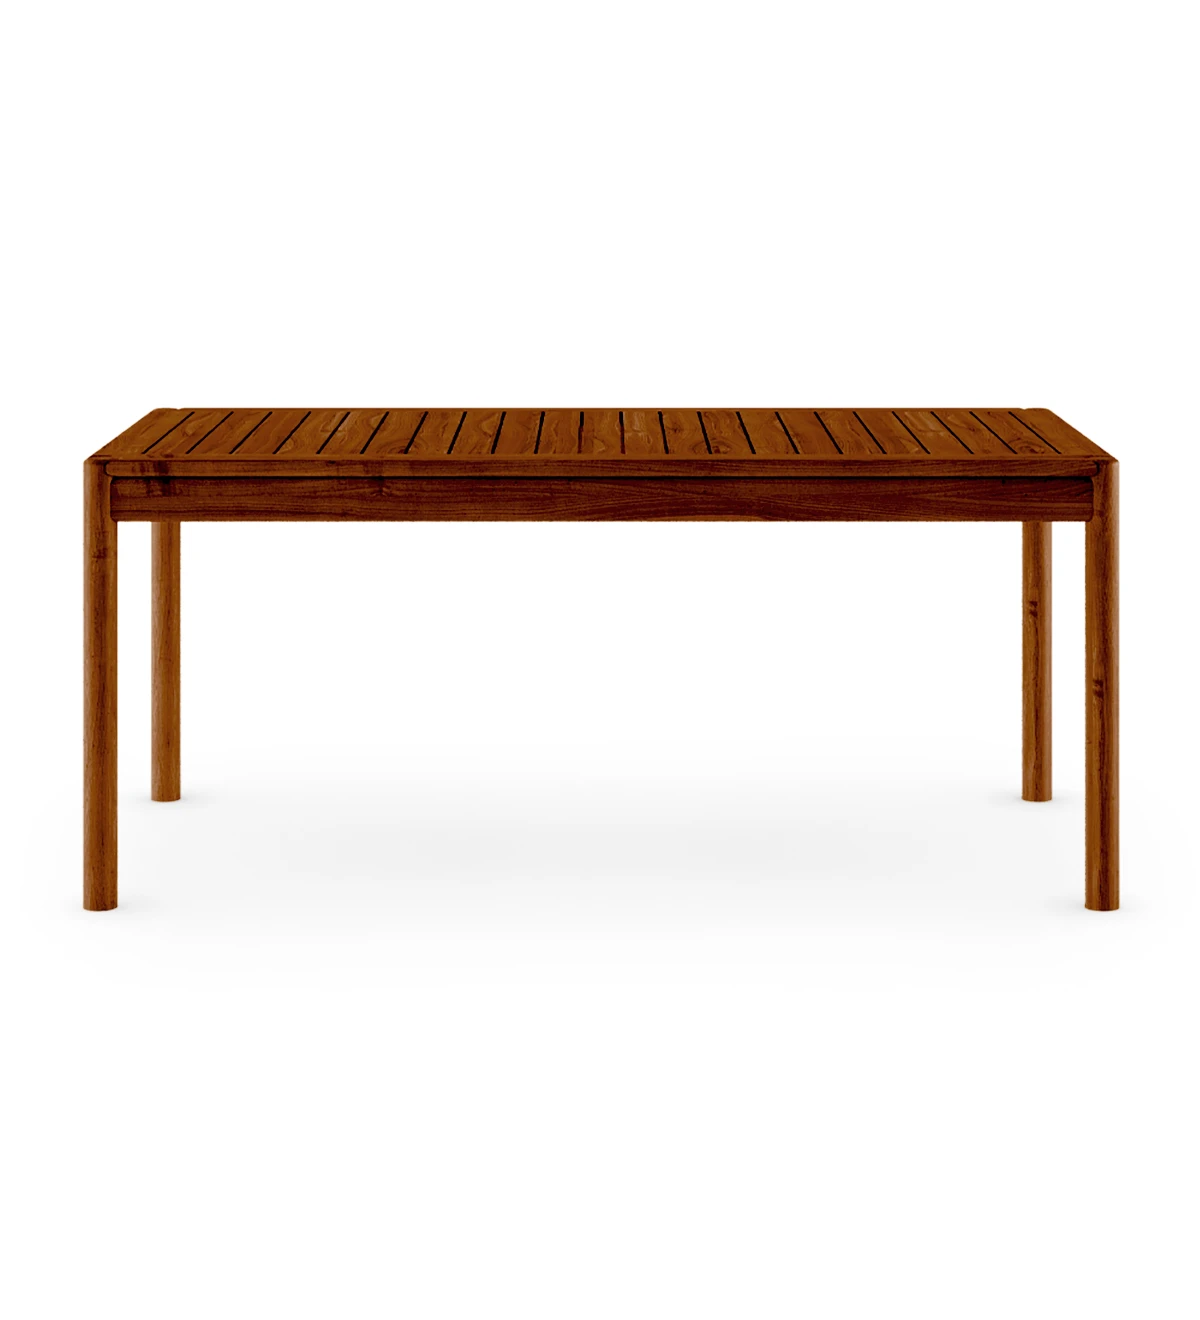 Rectangular dining table in honey-colored natural wood.